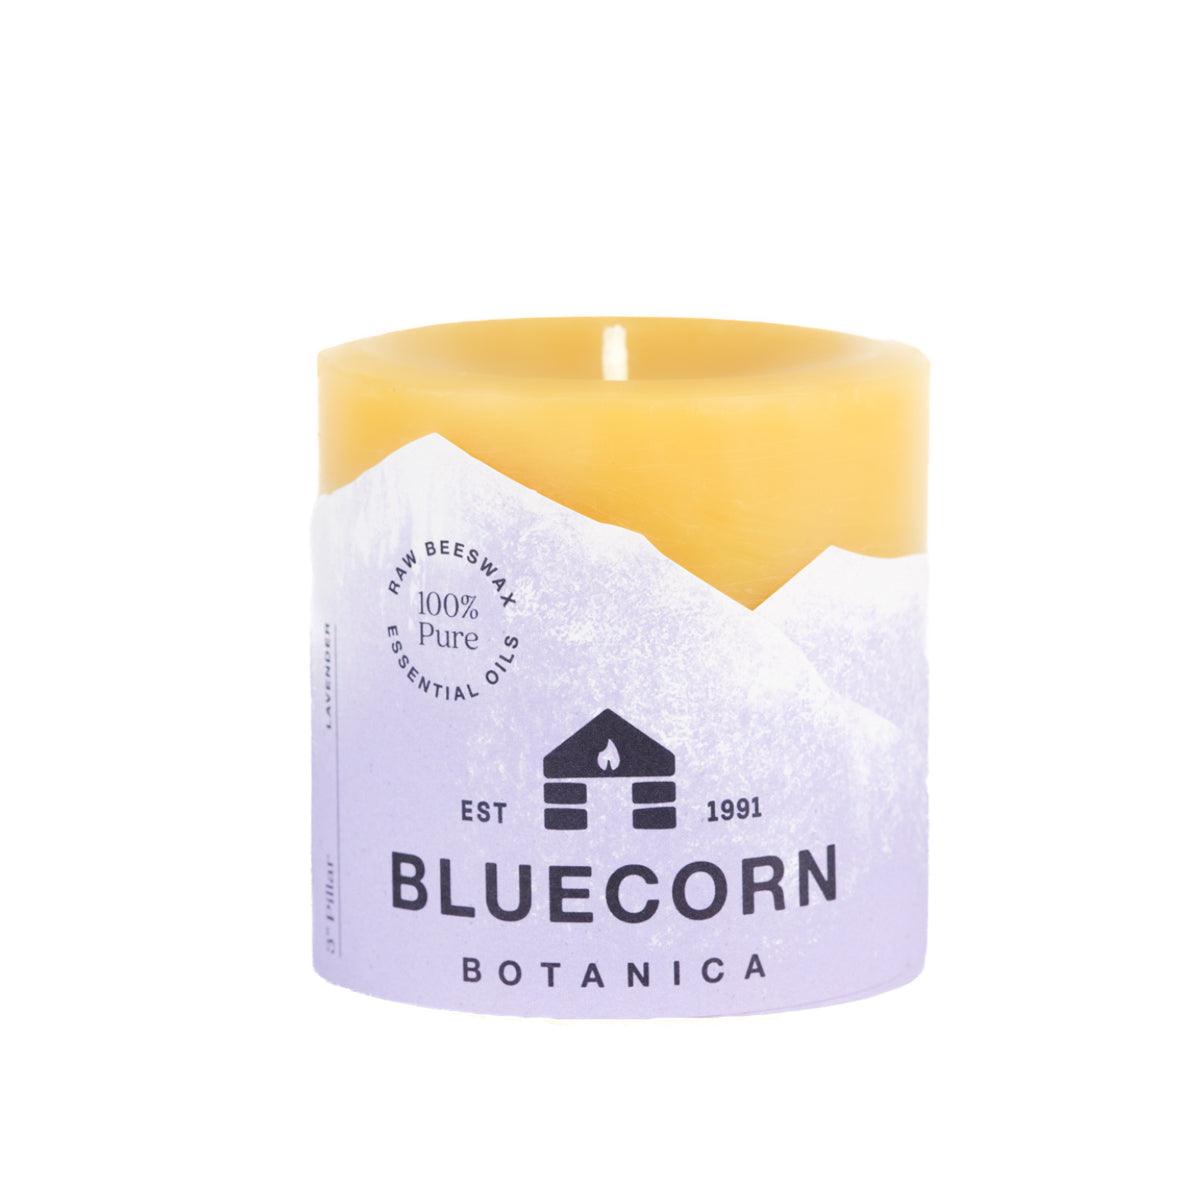 Bluecorn Botanica 100% Pure Beeswax Lavender 3" x 3" Scented Pillar Candle. Burn Time: 50 hours. Made with 100% Pure Beeswax, 100% Pure Essential Oils, and a 100% pure cotton wick, no lead. Candles are paraffin free, clean burning and non-toxic. Features Bluecorn Botanica label in purple printed on 100% recycled paper. Wax is golden in color.